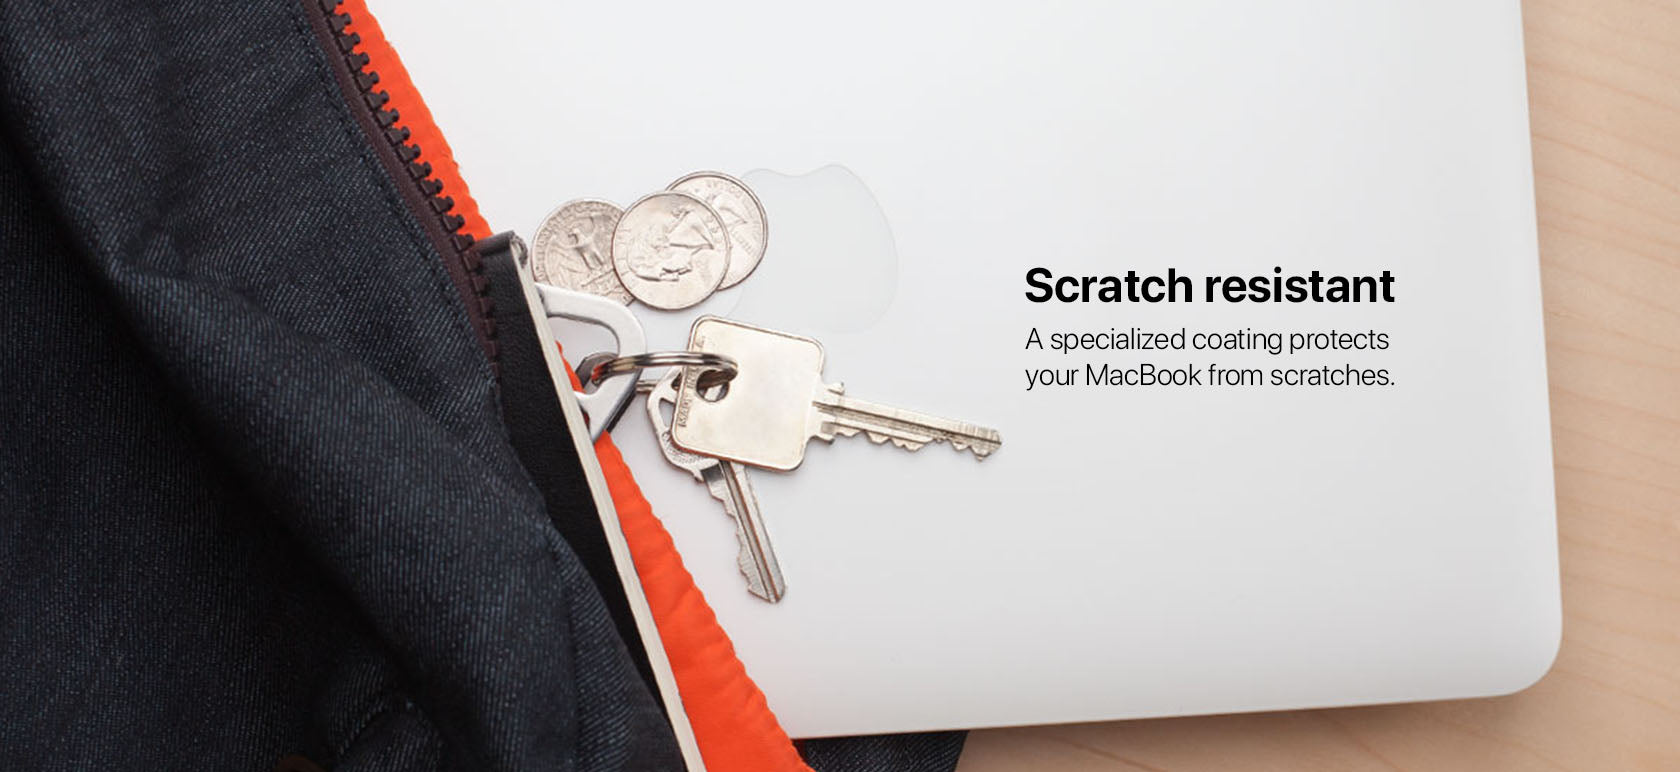 Scratch resistant A specialized coating protects your MacBook from scratches.